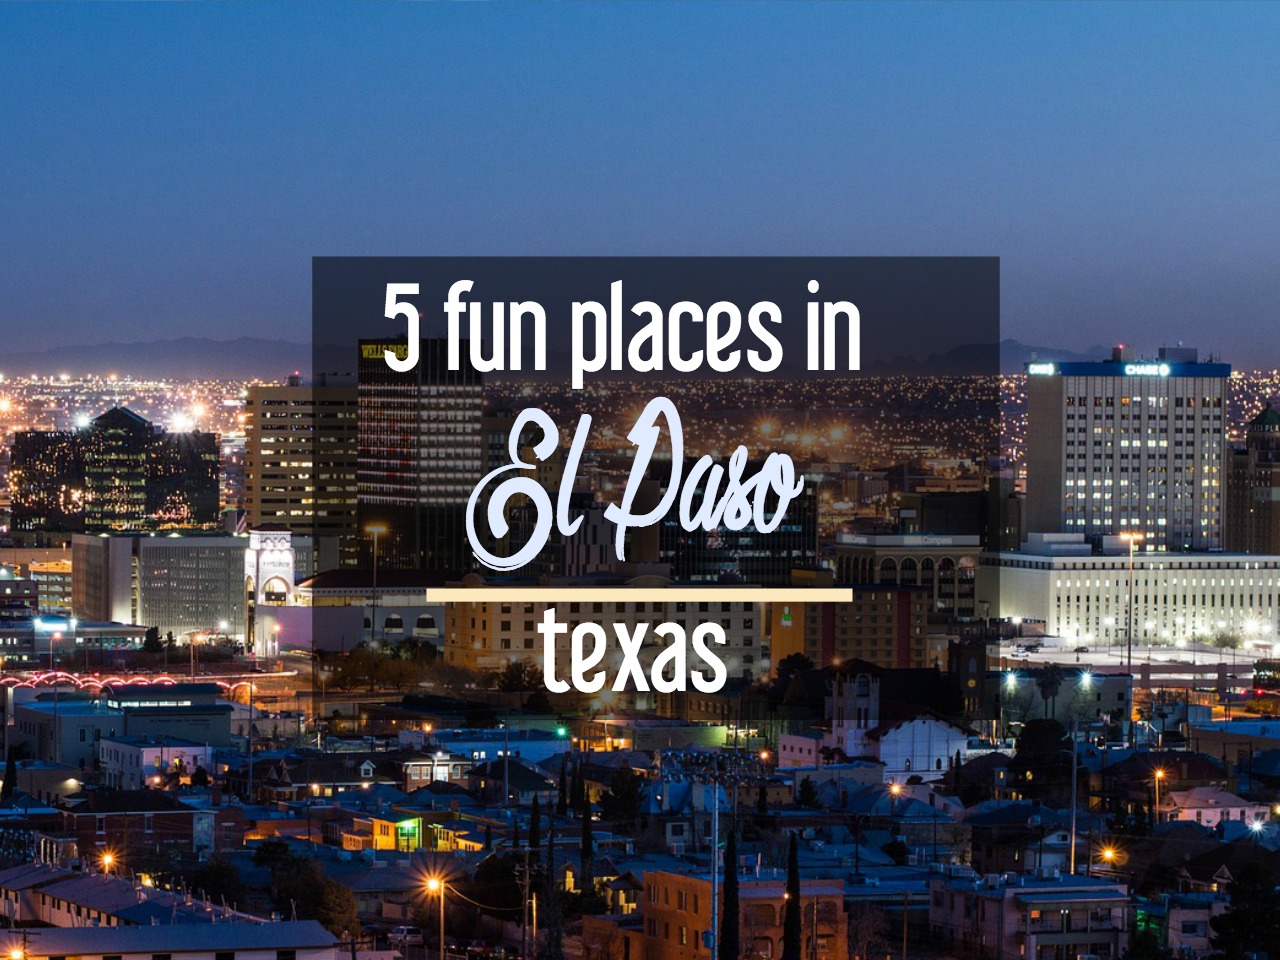 History, Hiking, and More: 5 Fun Places in El Paso, Texas - Cosmos